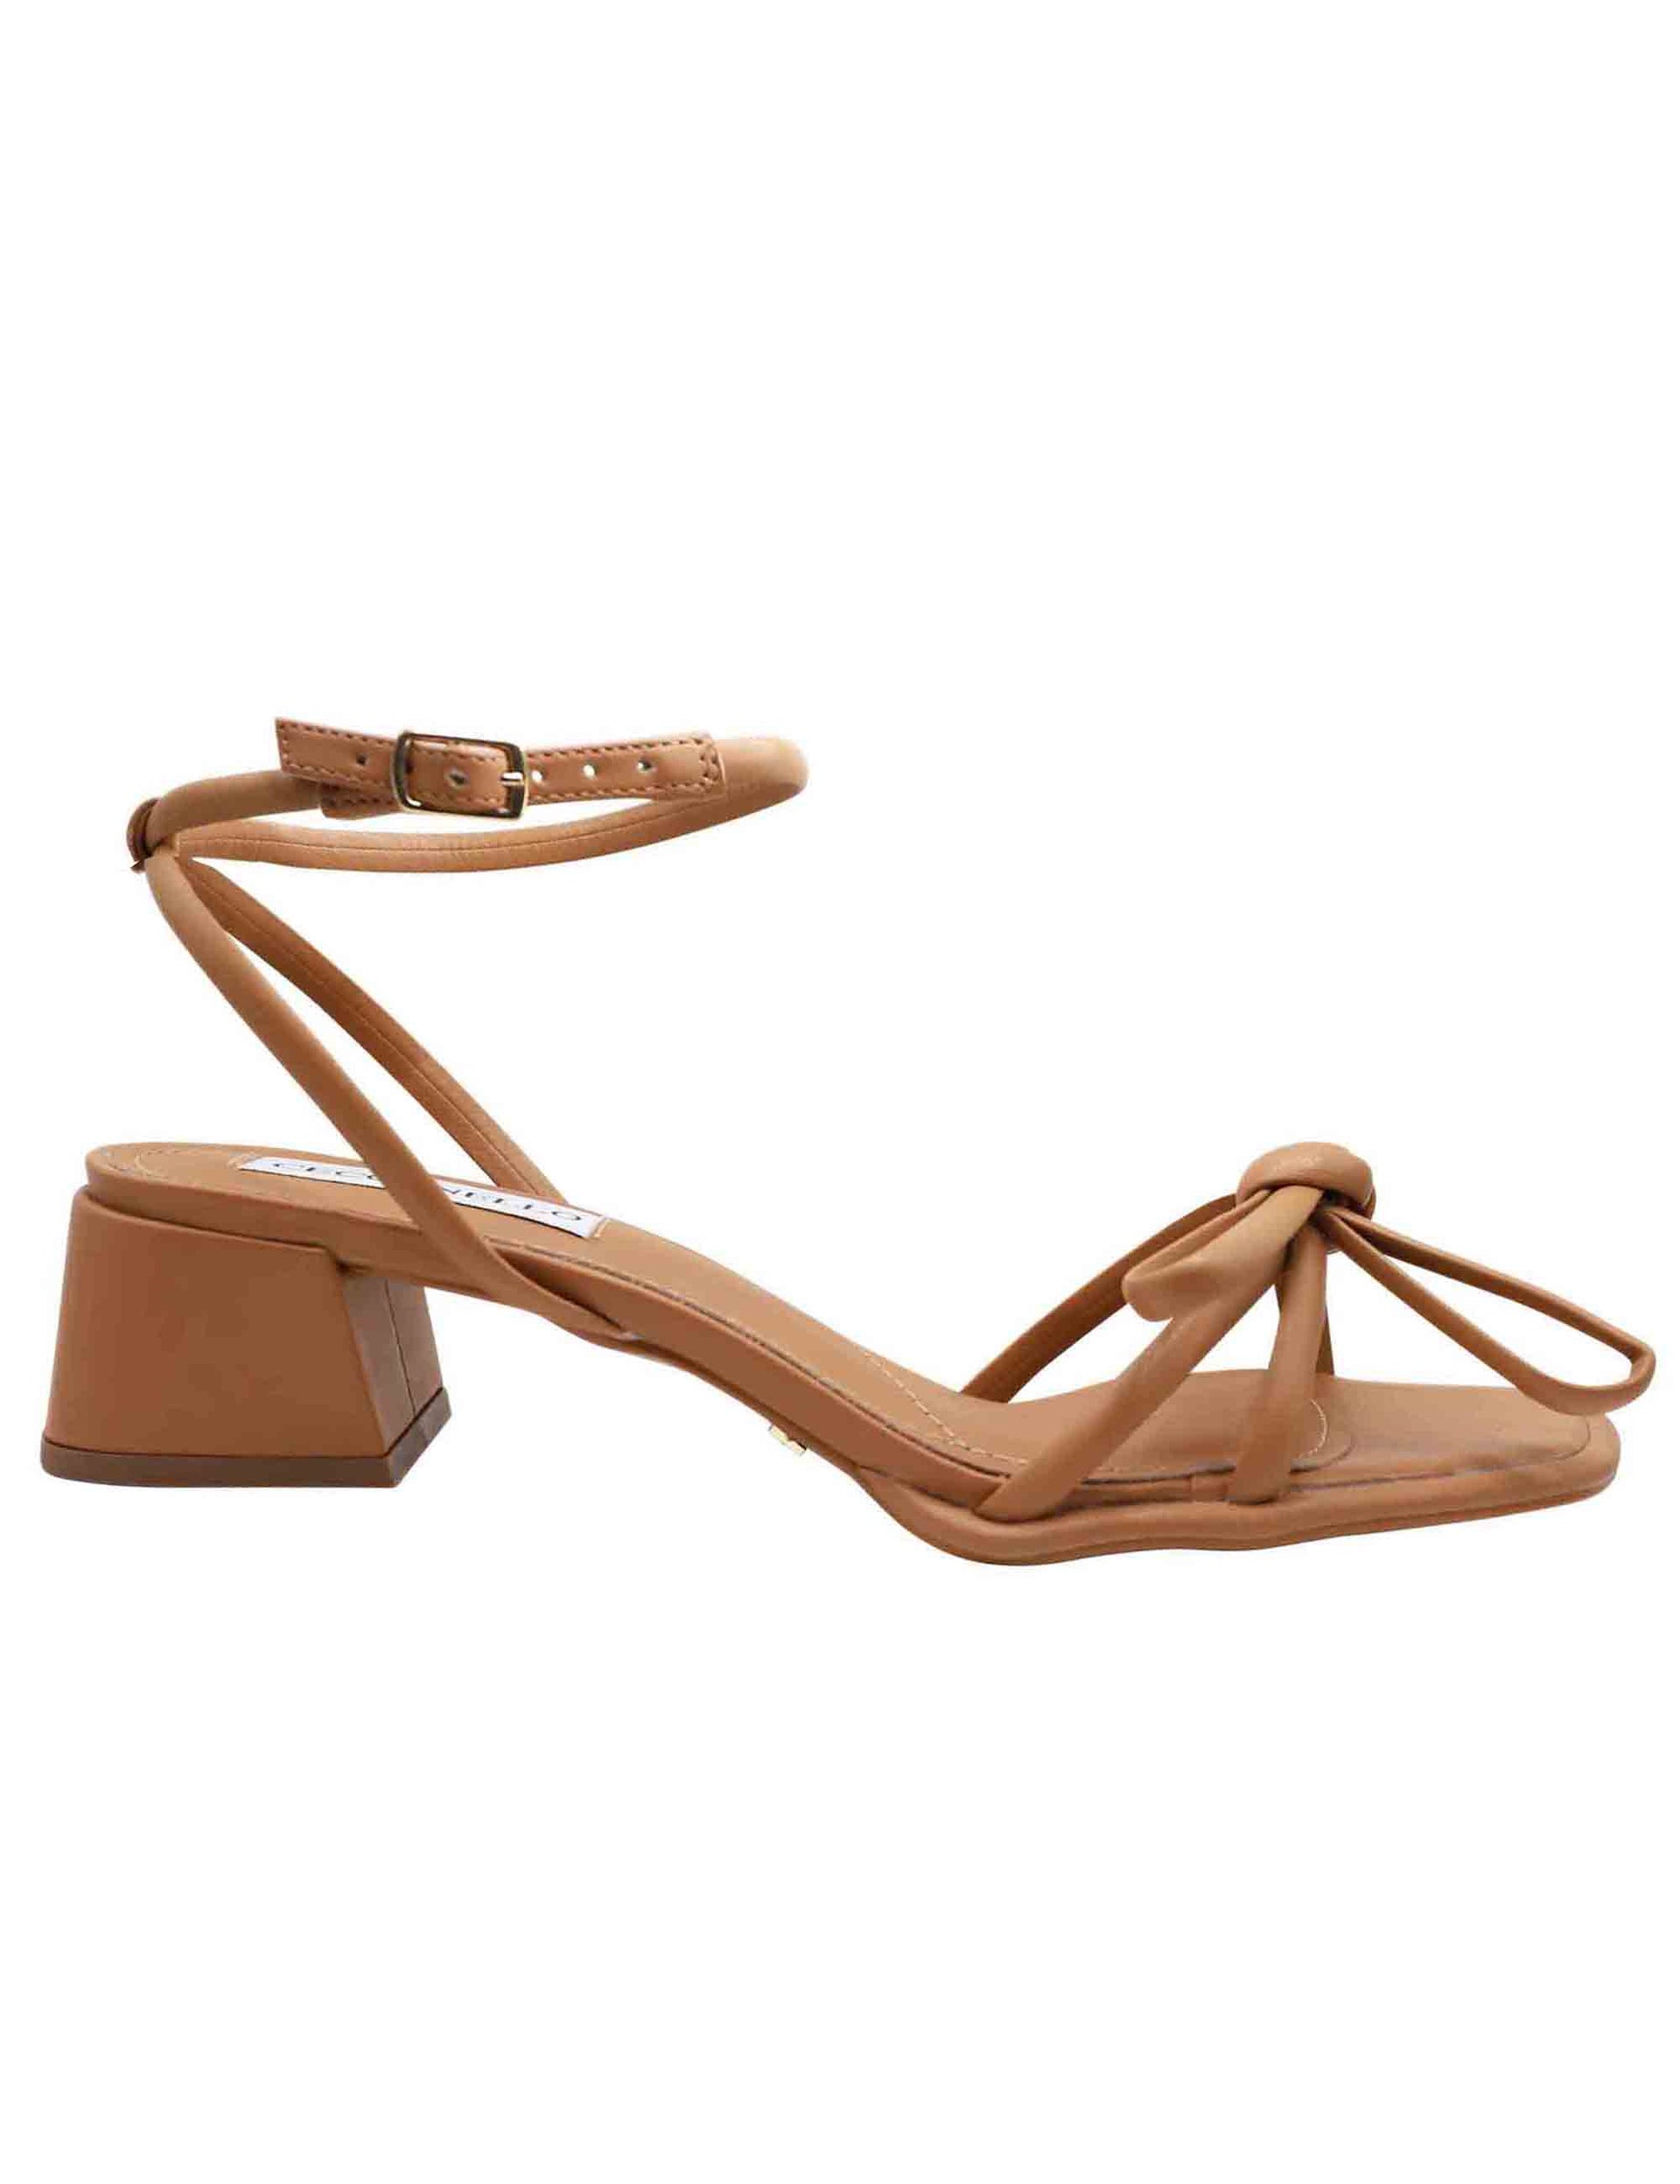 Women's sandals in tan leather with front bow and ankle strap